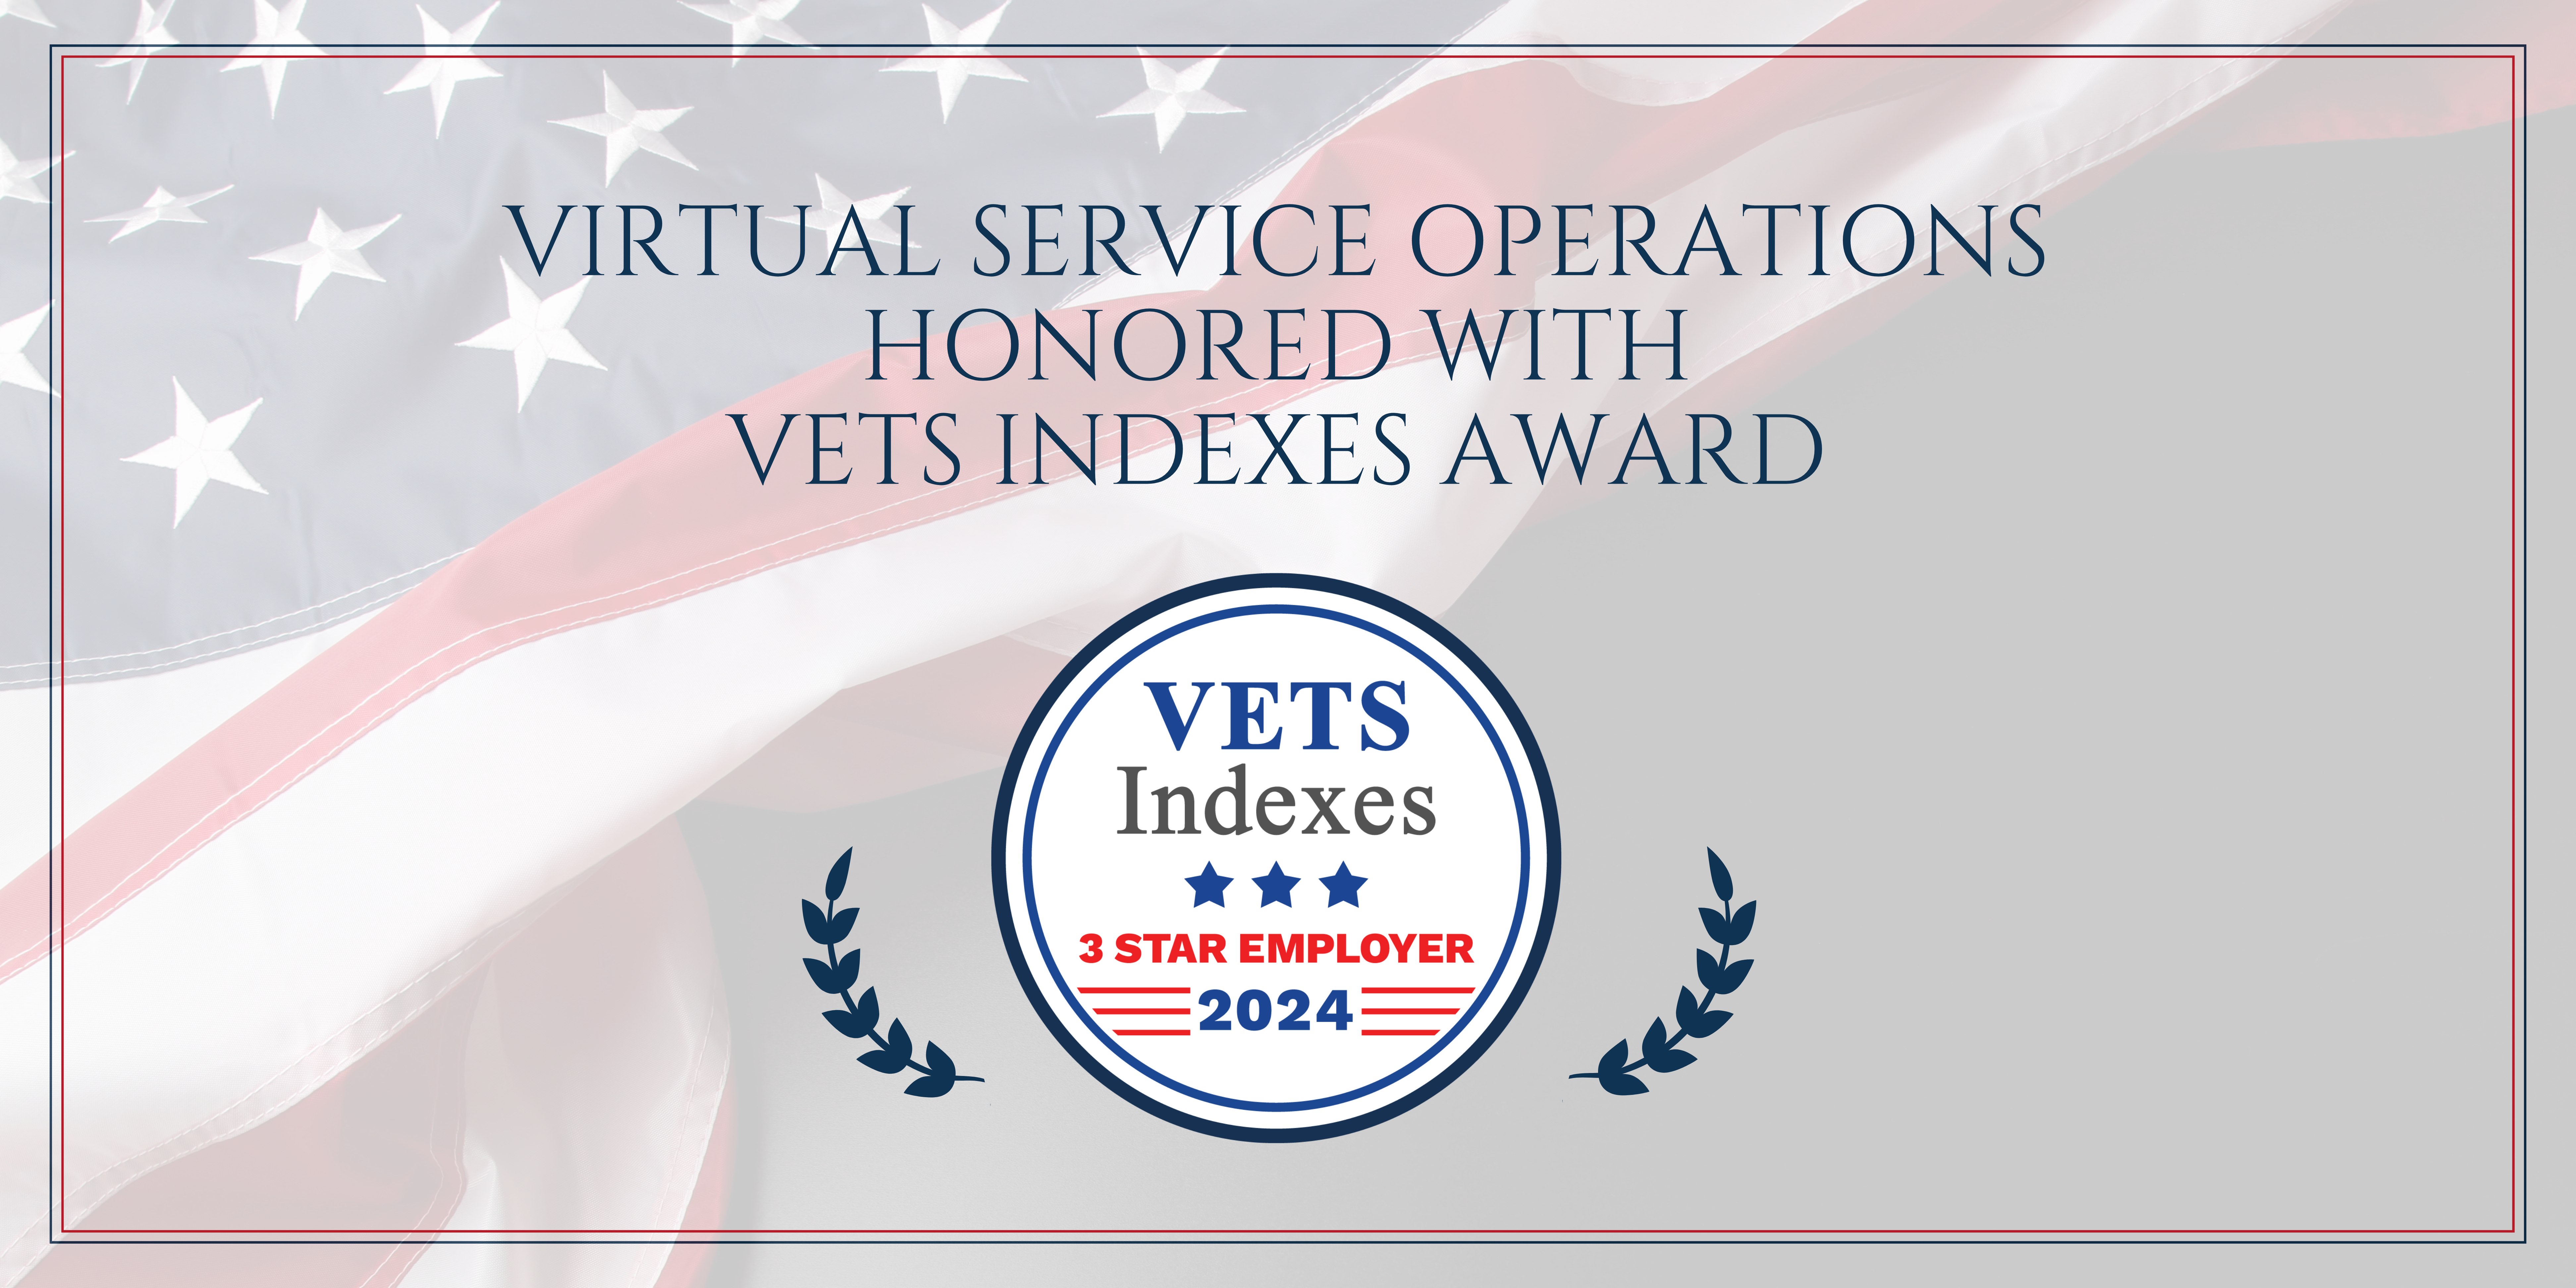 Virtual Service Operations Honored as a 2024 VETS Indexes 3 Star Employer